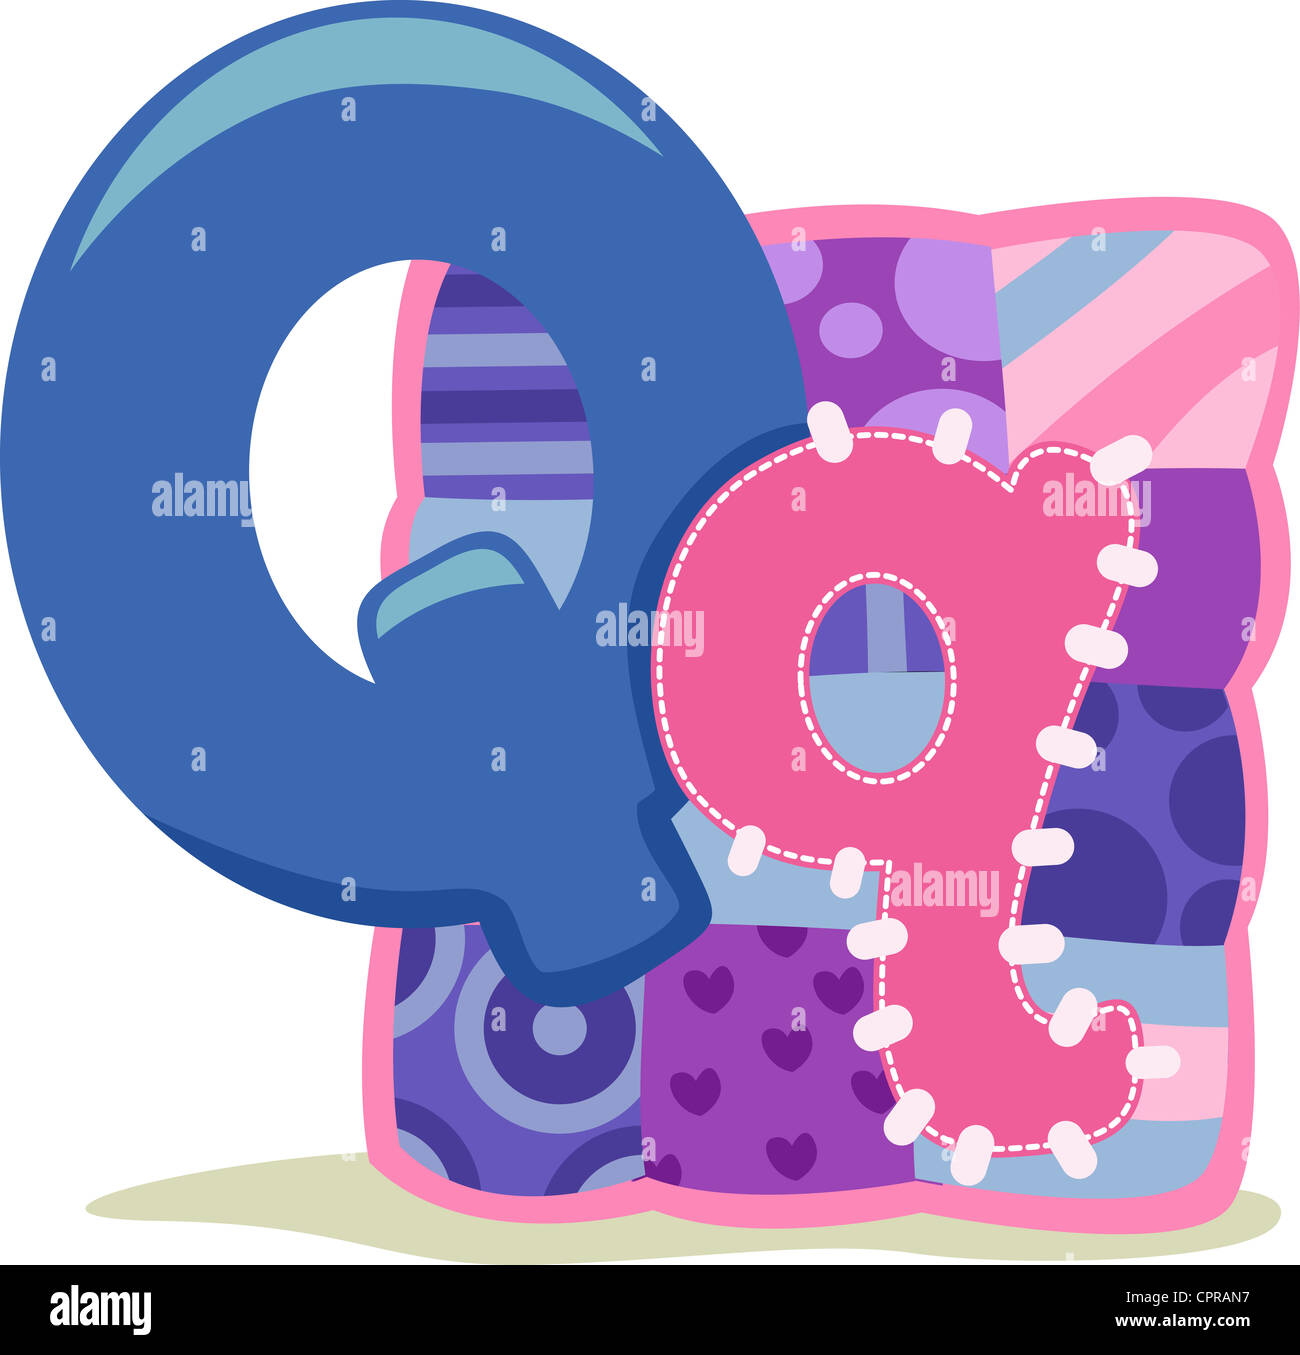 Illustration Featuring the Letter Q Stock Photo